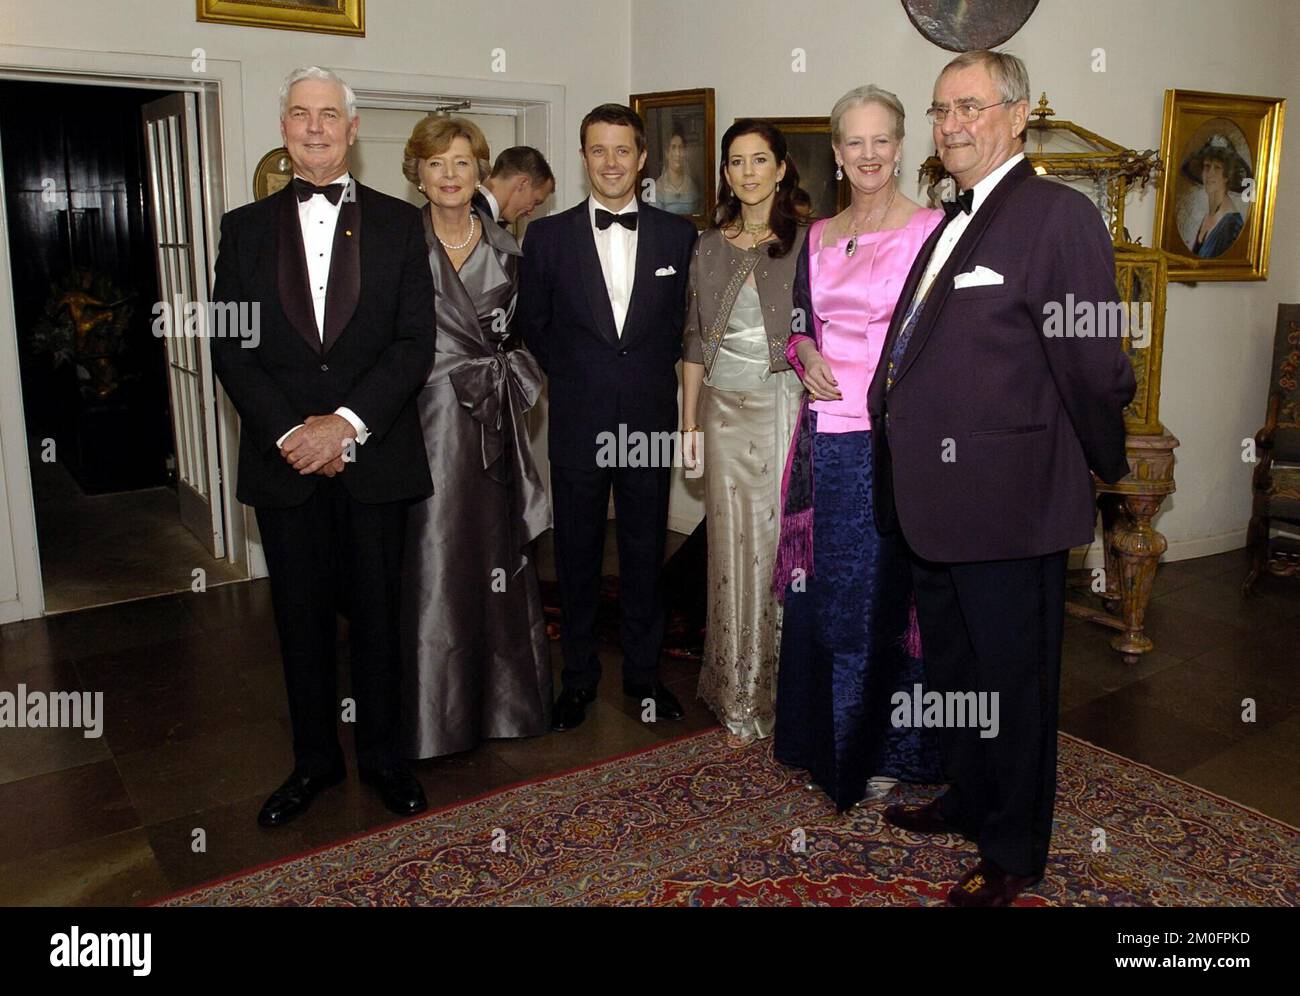 The Governor-General of Australia hosted an official dinner for the Danish royal family and invited guests. Left ro right: The Governor-General of Australia, Major-General Michael Jeffery, and his wife Marlena Jeffery with Crown Prince Frederik, Miss Mary Donaldson, Queen Margrehe II and the Prince Consort Henrik. Mary Donaldson and the Crown Prince will marry Friday, May 14. Stock Photo